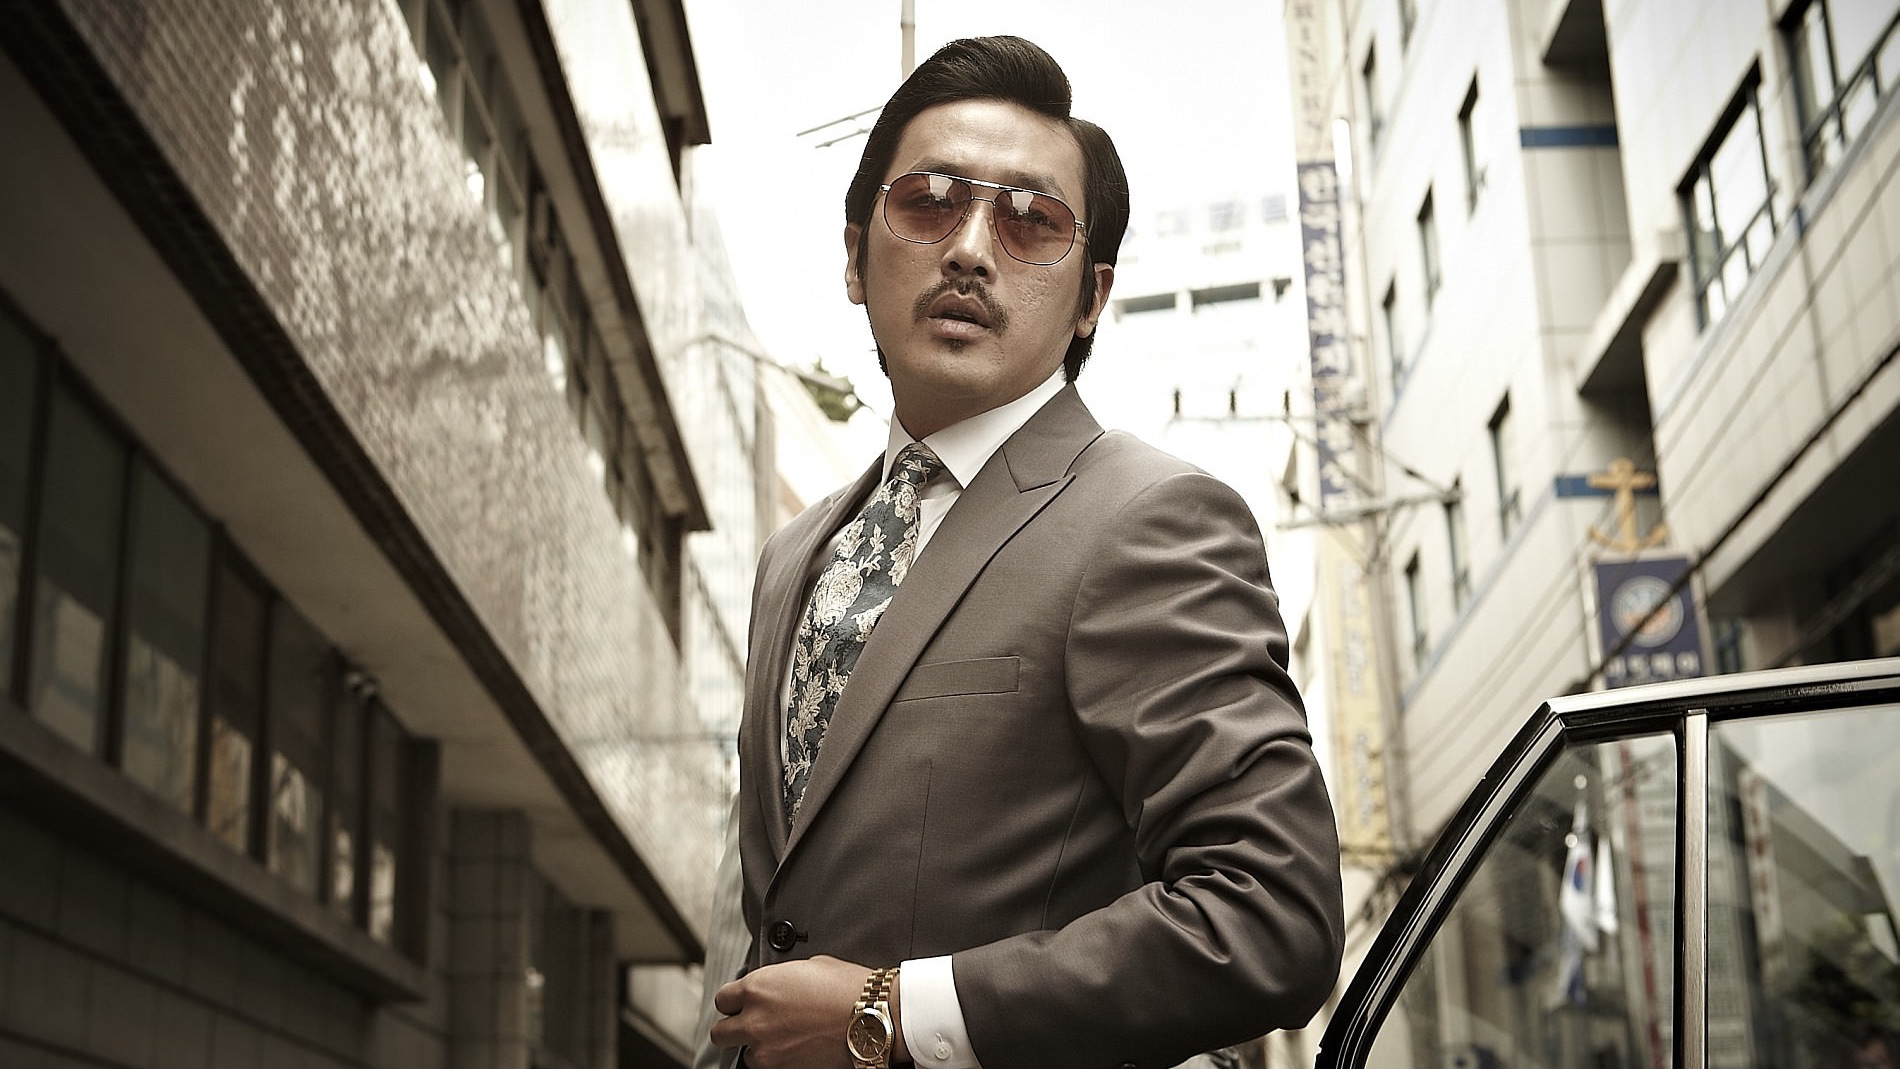 1) HA Jung-woo_Nameless Gangster_ Rules of the Time